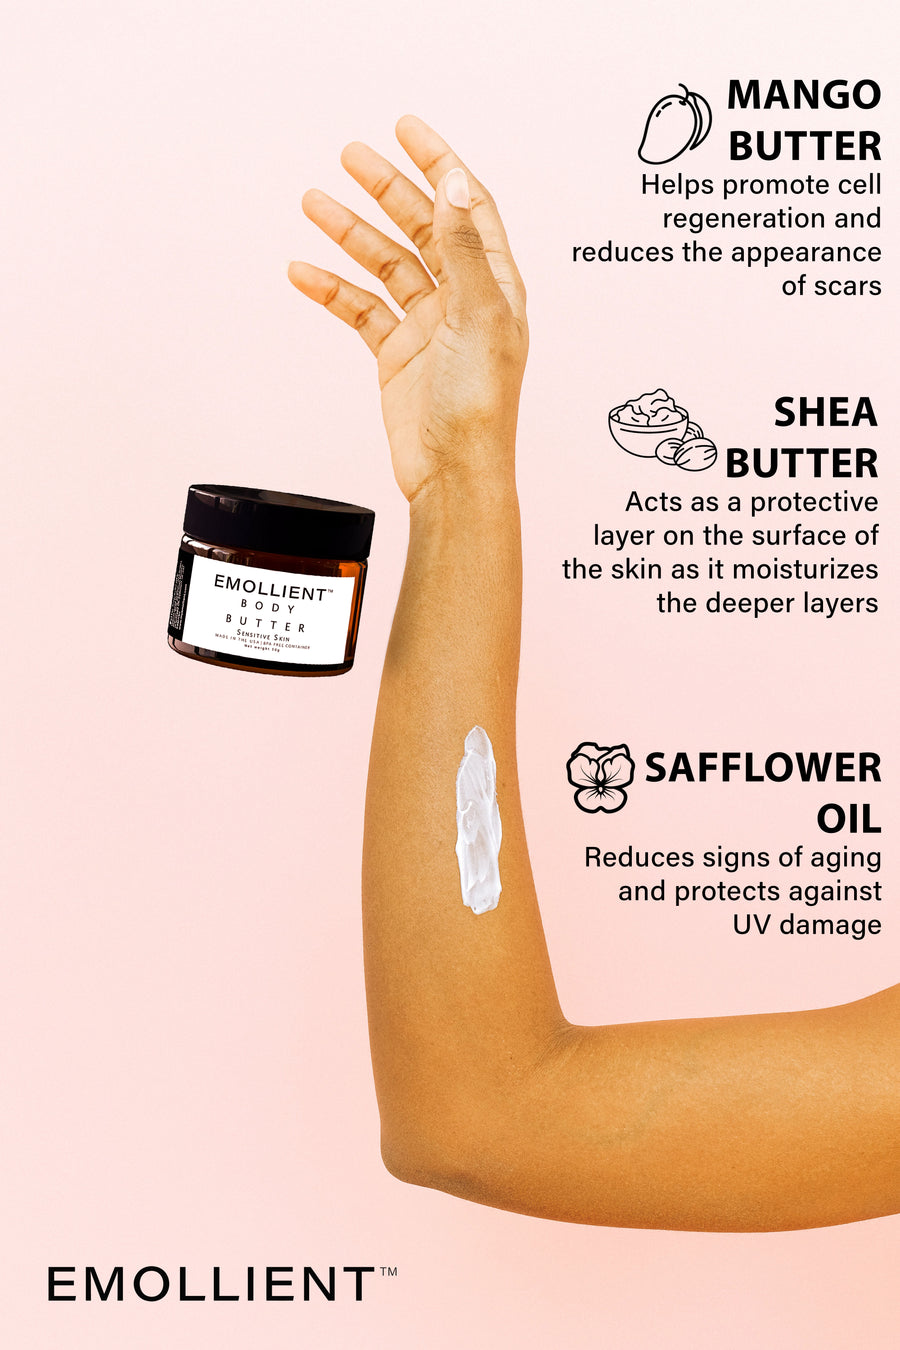 Woman's hand with Body Butter